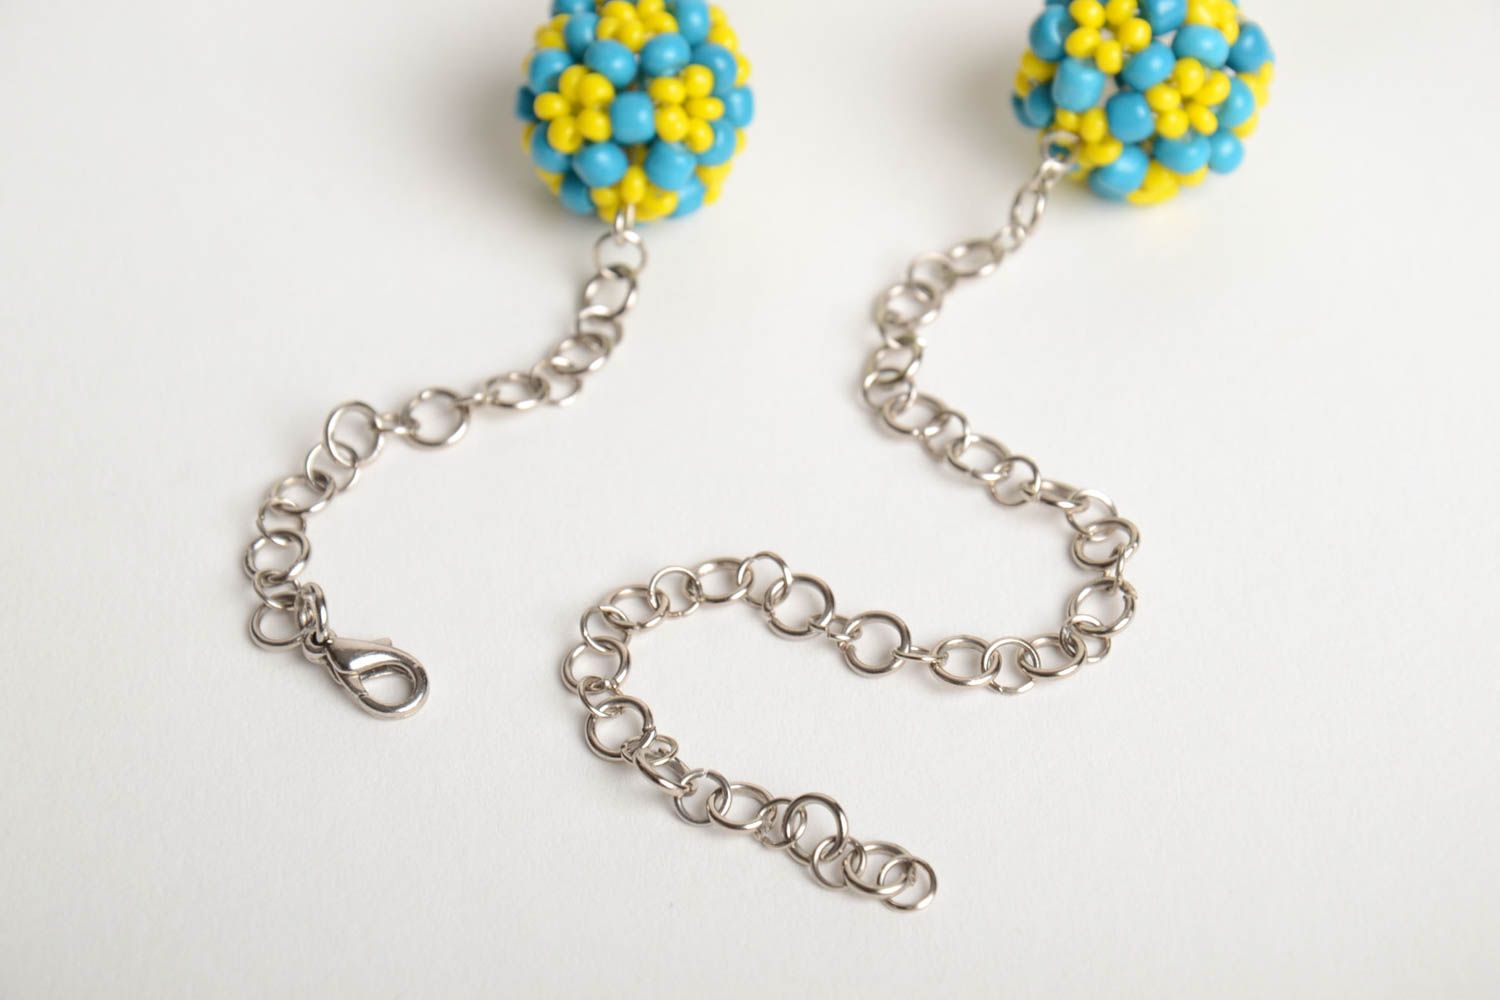 Handmade designer necklace with metal chain and bead woven blue and yellow balls photo 5